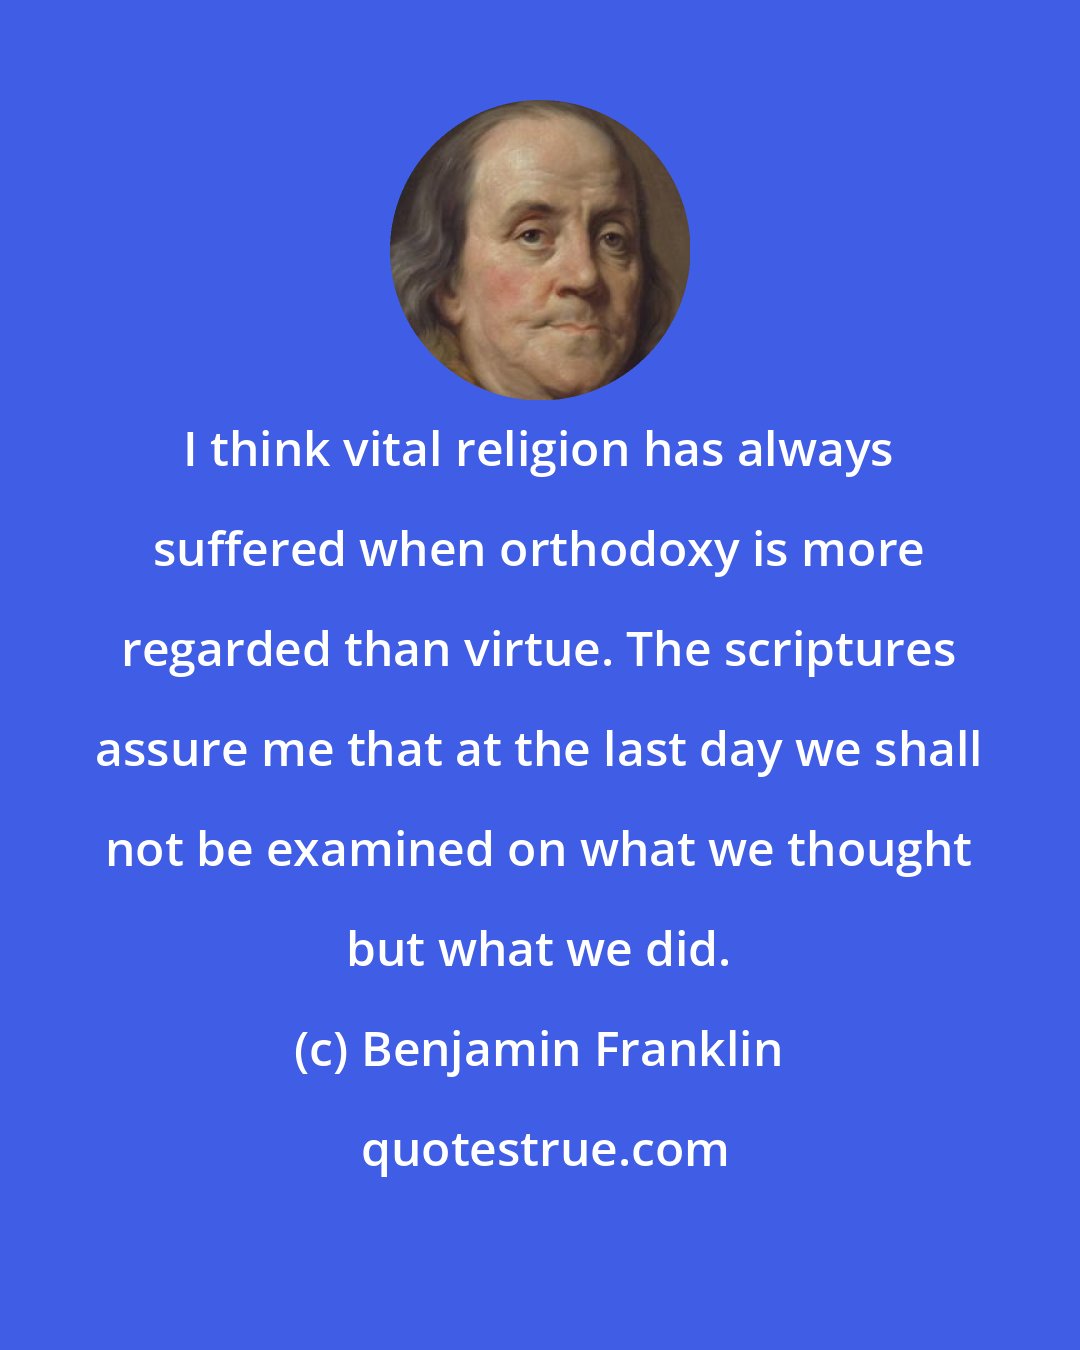 Benjamin Franklin: I think vital religion has always suffered when orthodoxy is more regarded than virtue. The scriptures assure me that at the last day we shall not be examined on what we thought but what we did.